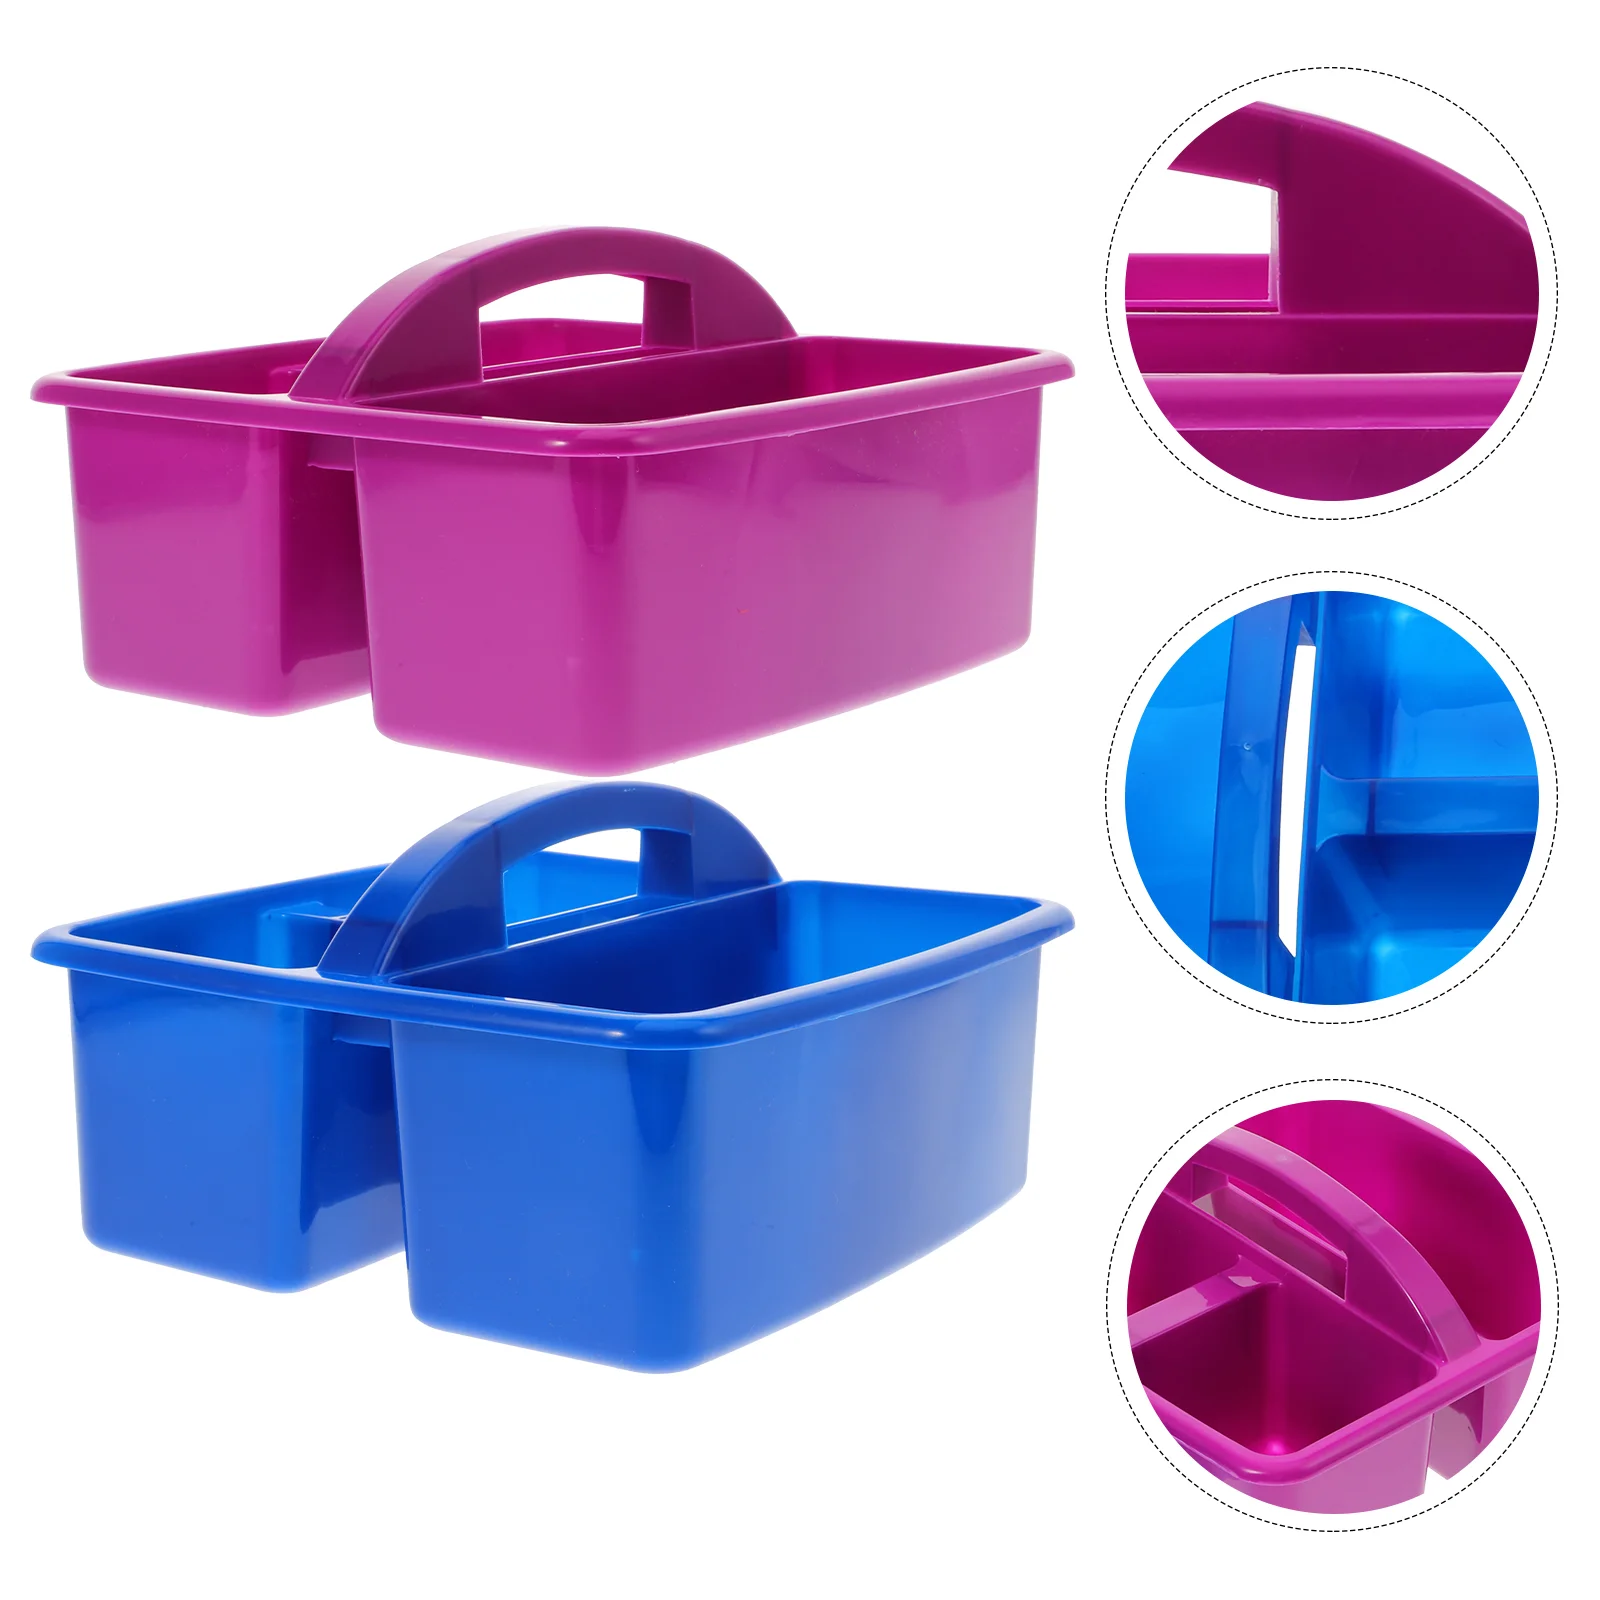 

2 Pcs Storage Box Supplies Cases Paint Brushes Compartment Drawing Holder Plastic Containers Portable Basket Student Bins